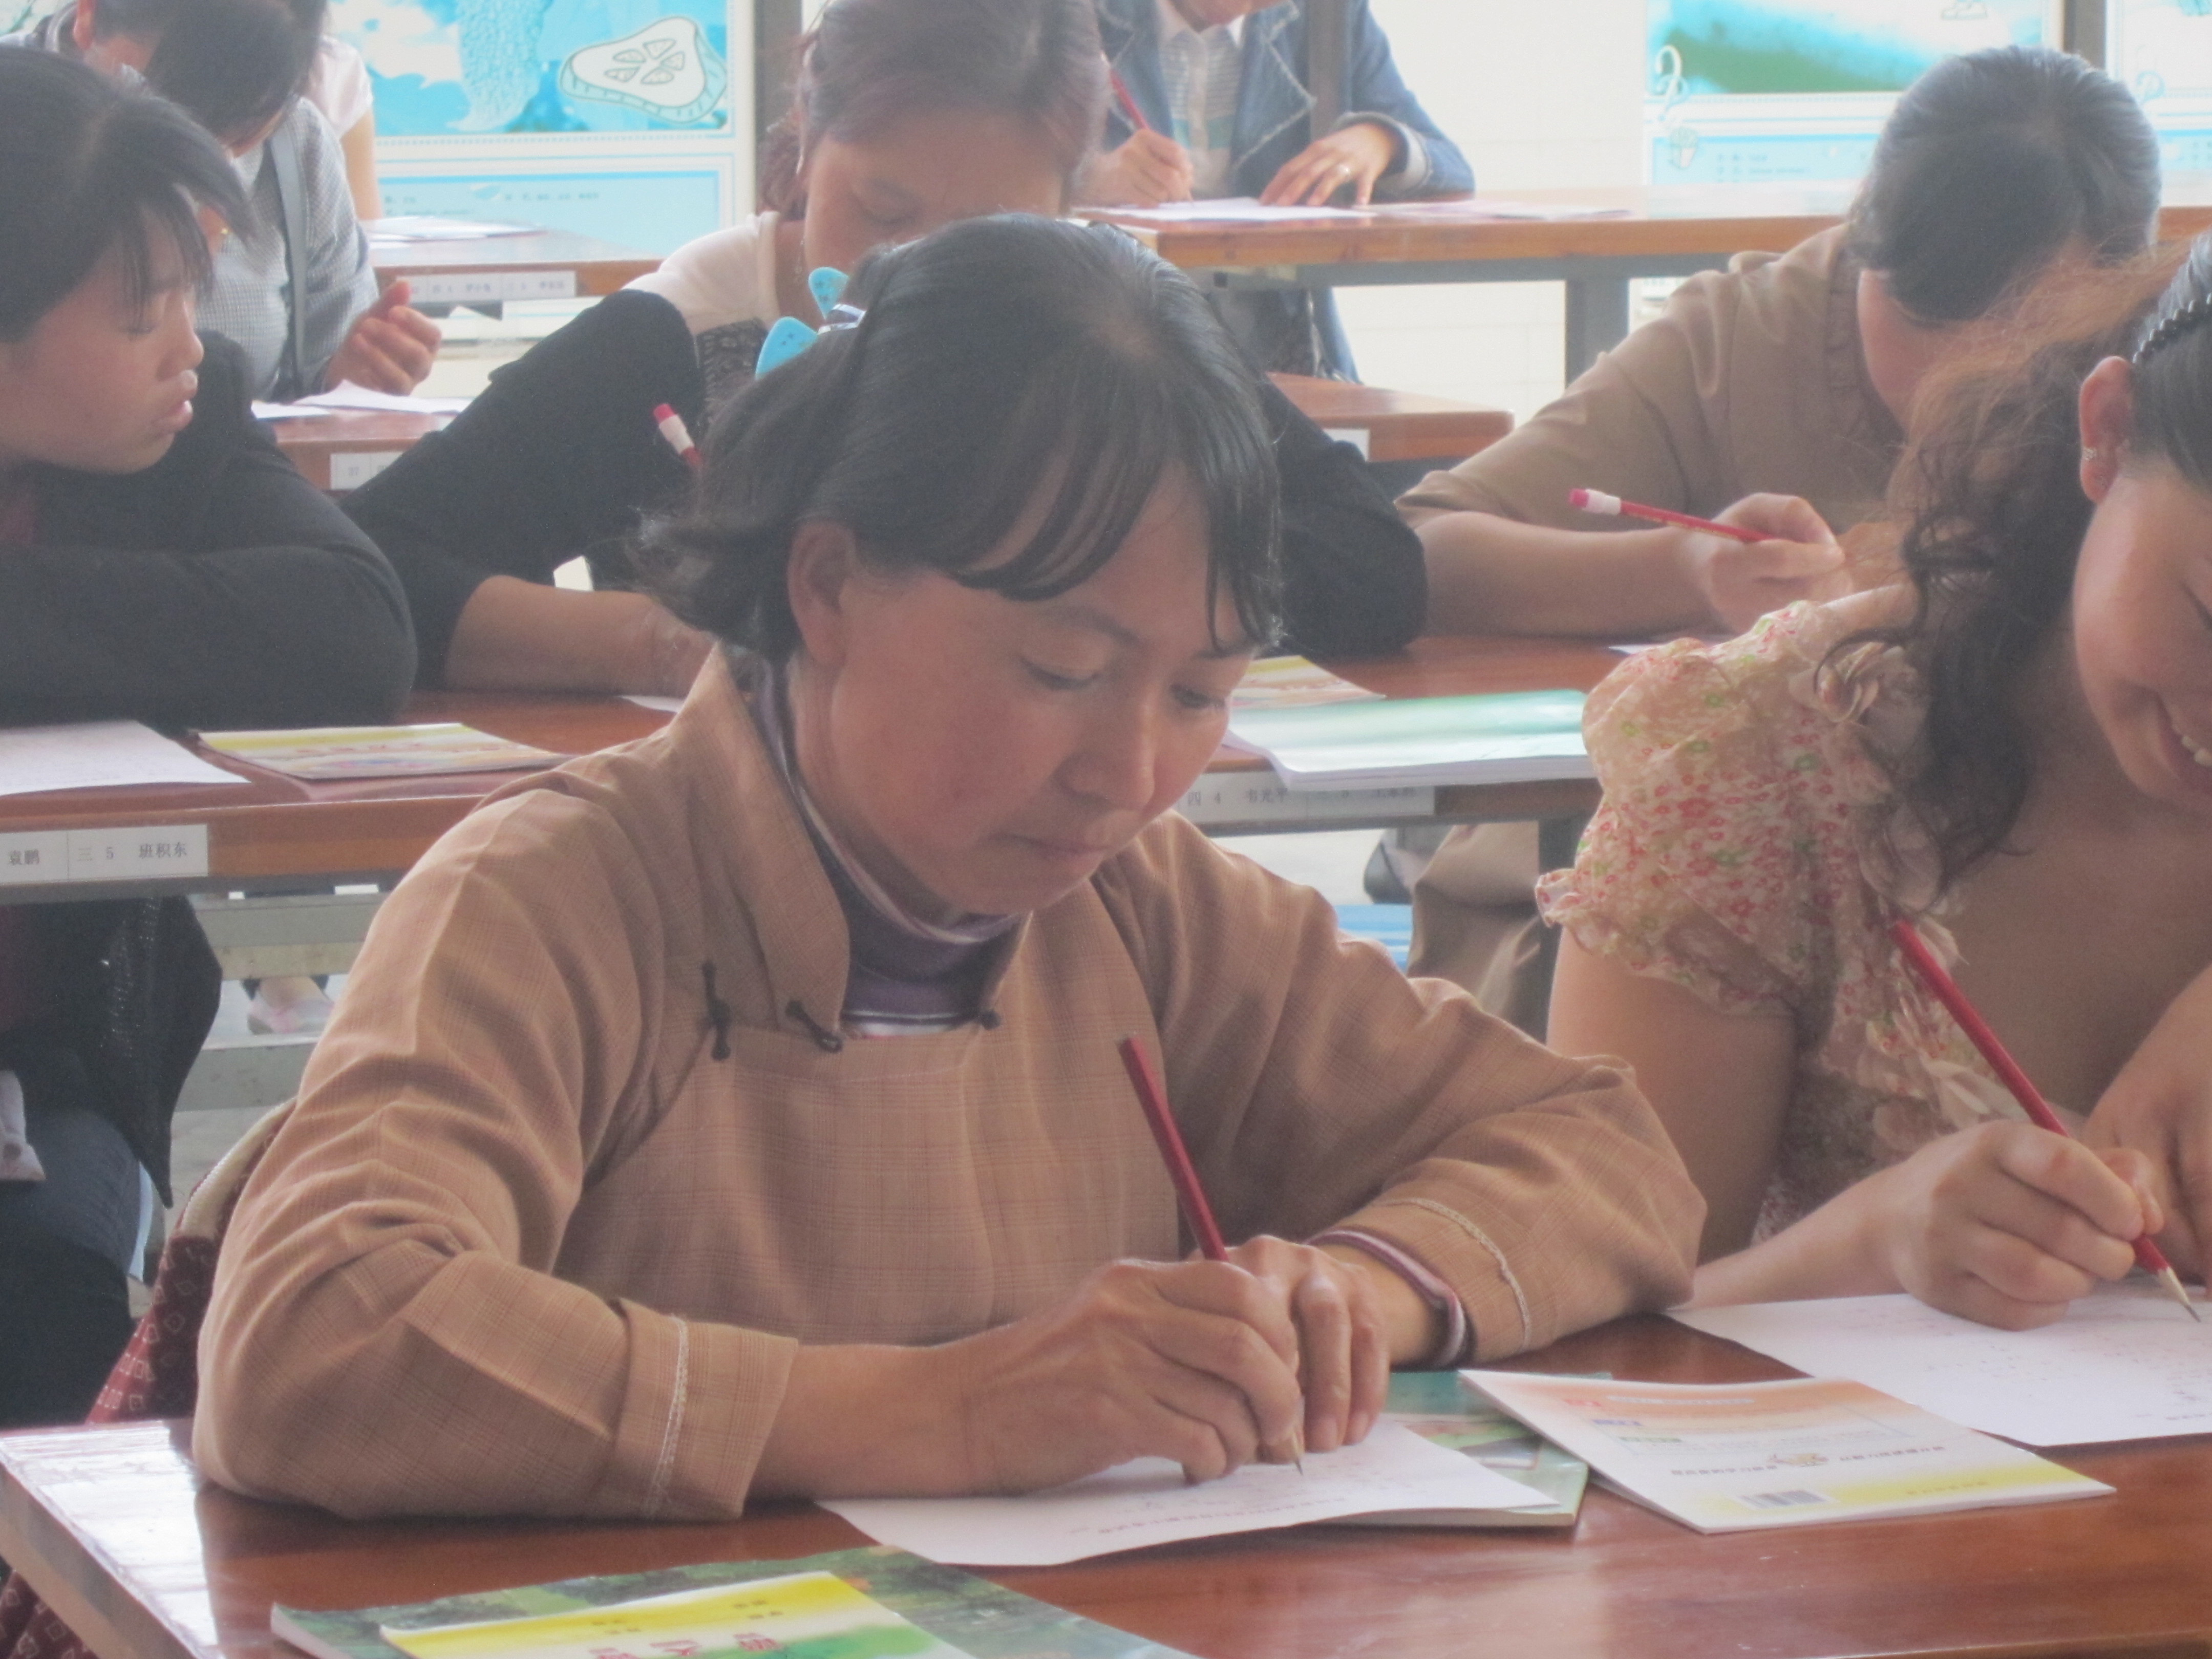 Chinese agricultural woman learning to read and write in a literacy program